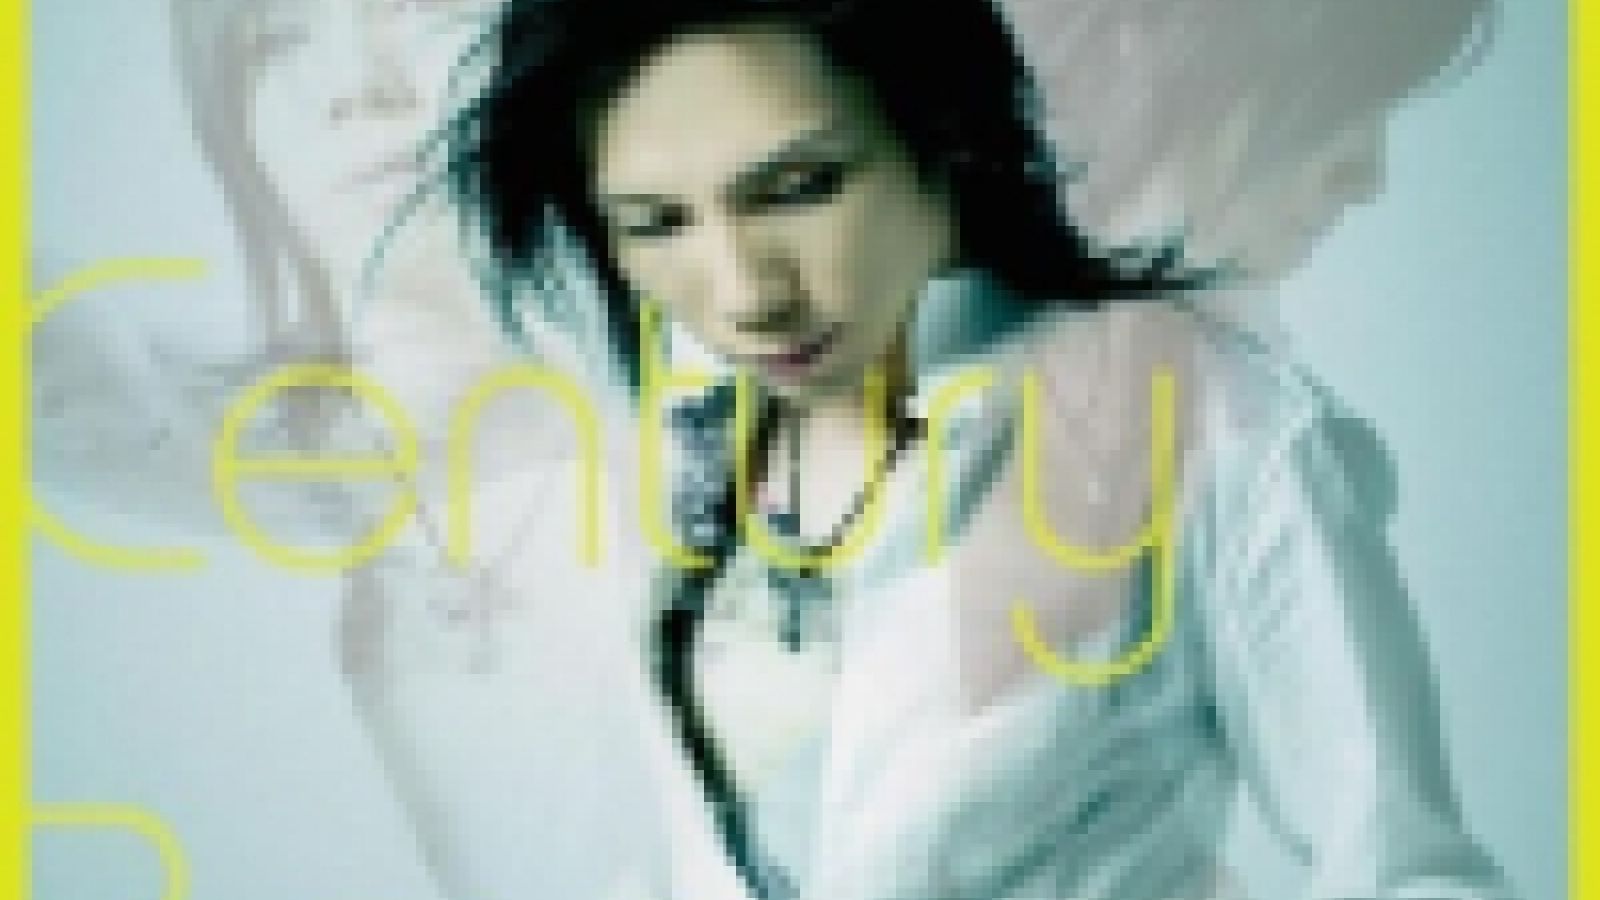 Acid Black Cherry - 20+∞Century Boys © 2009 Zy.connection Inc. All Rights Reserved.